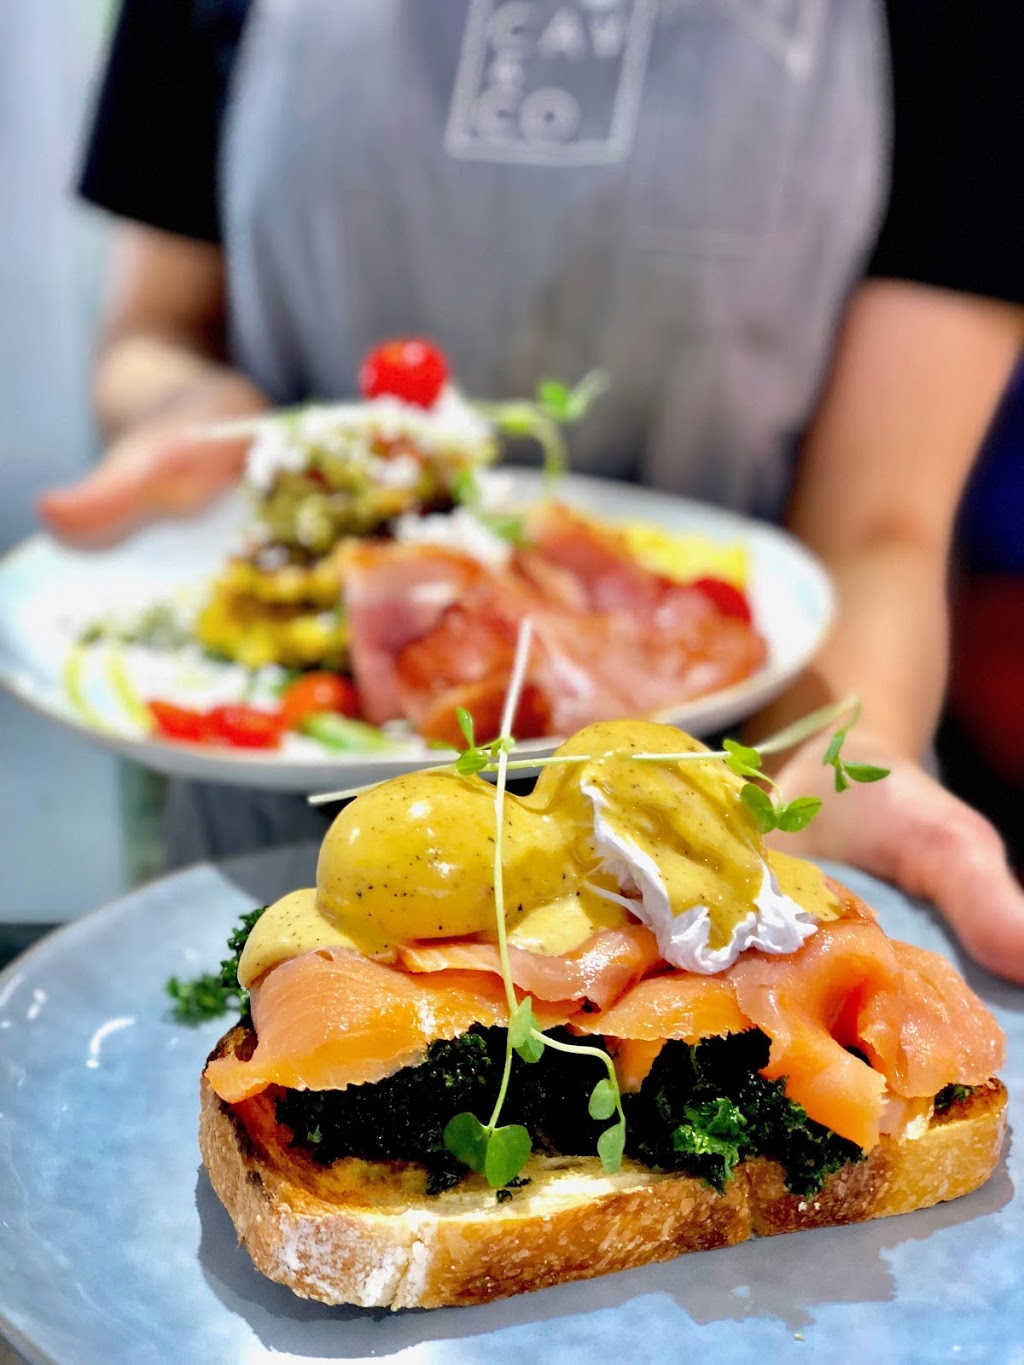 Cav&Co Cafe | cafe | 20 Pittwater Rd, Gladesville NSW 2111, Australia | 0298164108 OR +61 2 9816 4108